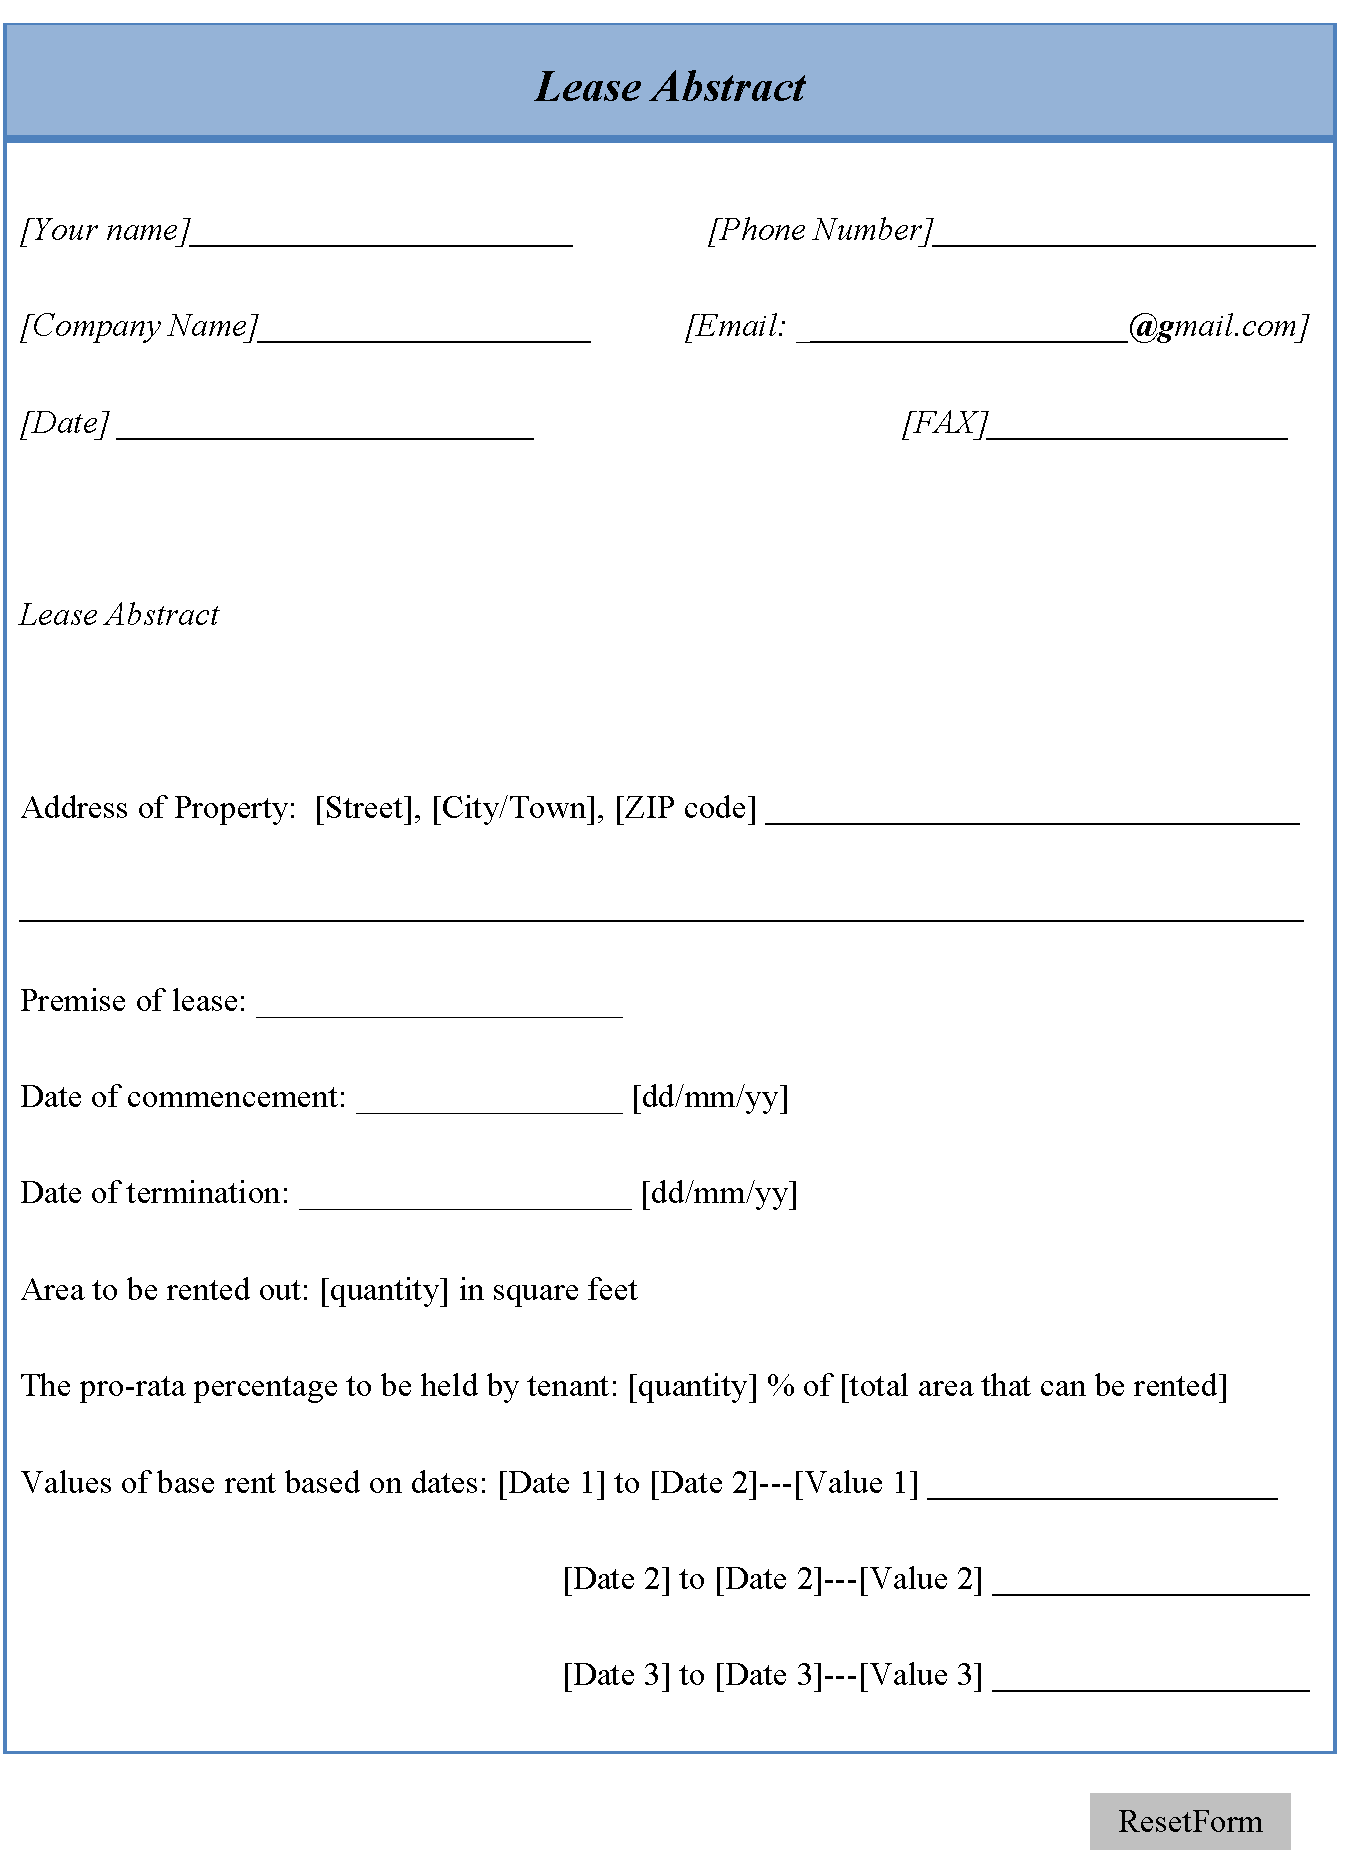 Lease abstract template